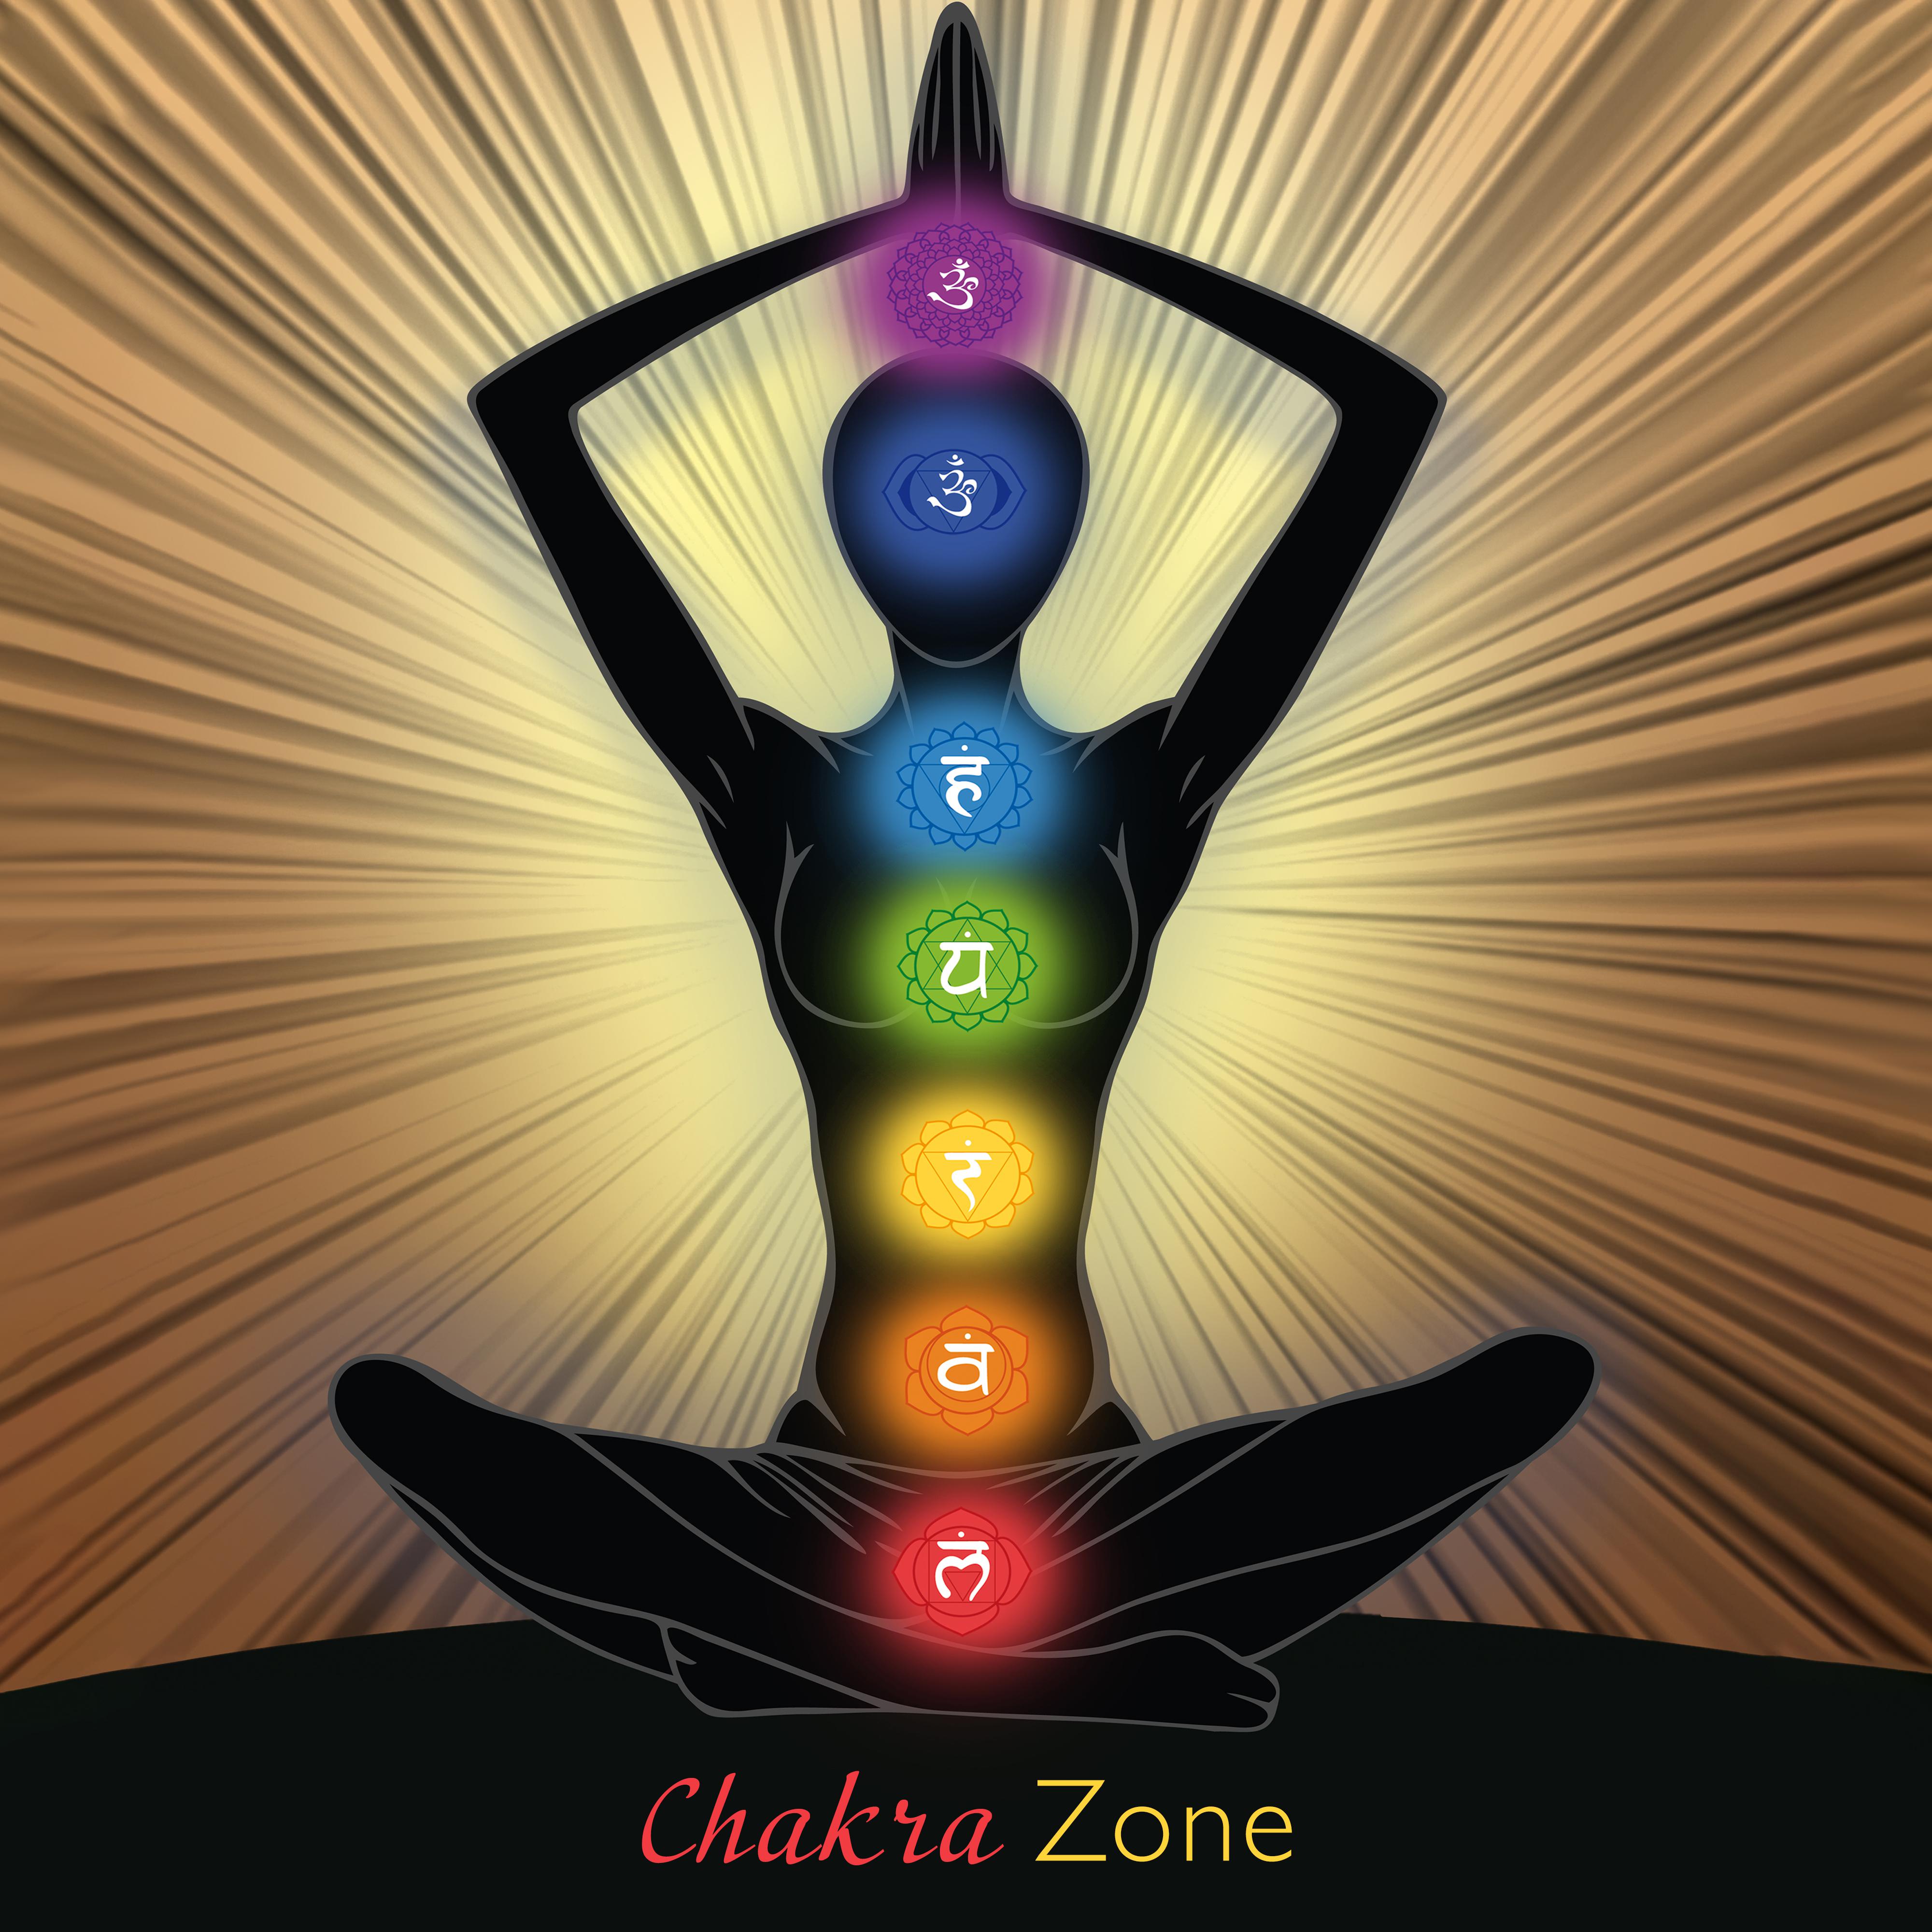 Chakra Zone – Meditation Music for Relaxation, Zen Lounge, Inner Focus, Guide to Meditation, Asian Meditation Noises, Nature Sounds